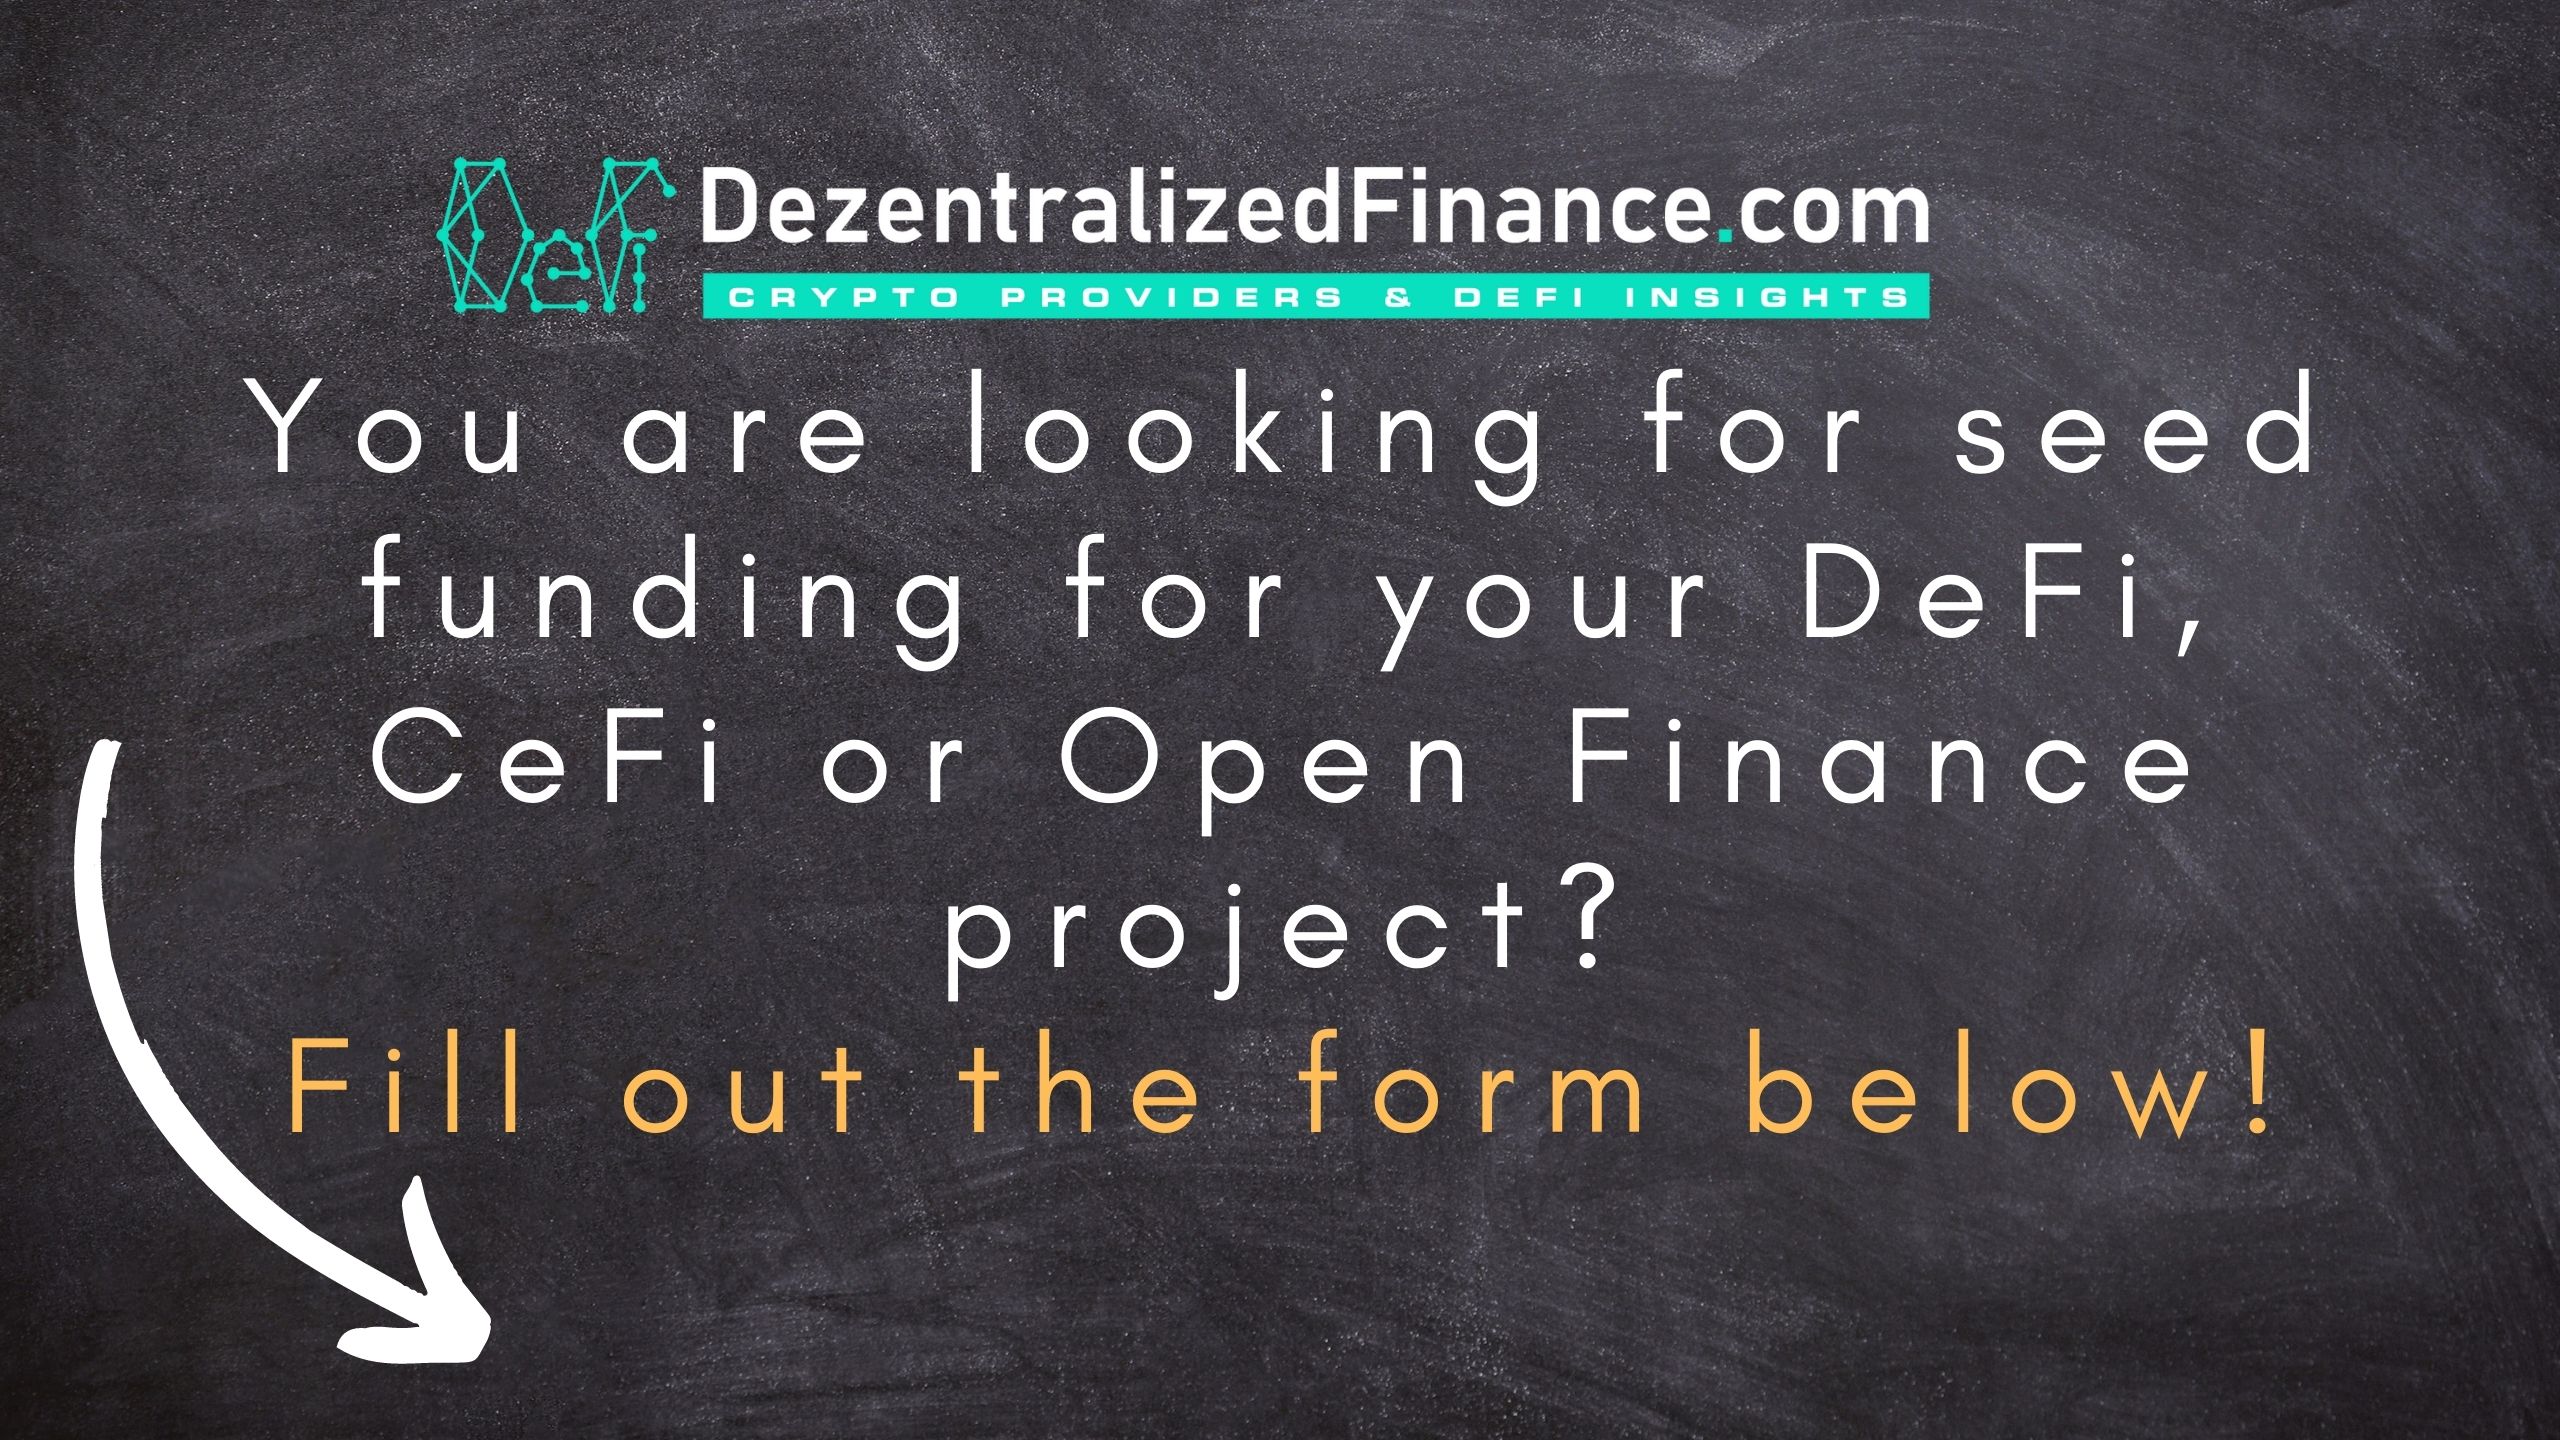 Seed Funding for DeFi, CeFi or OpenFinance projects